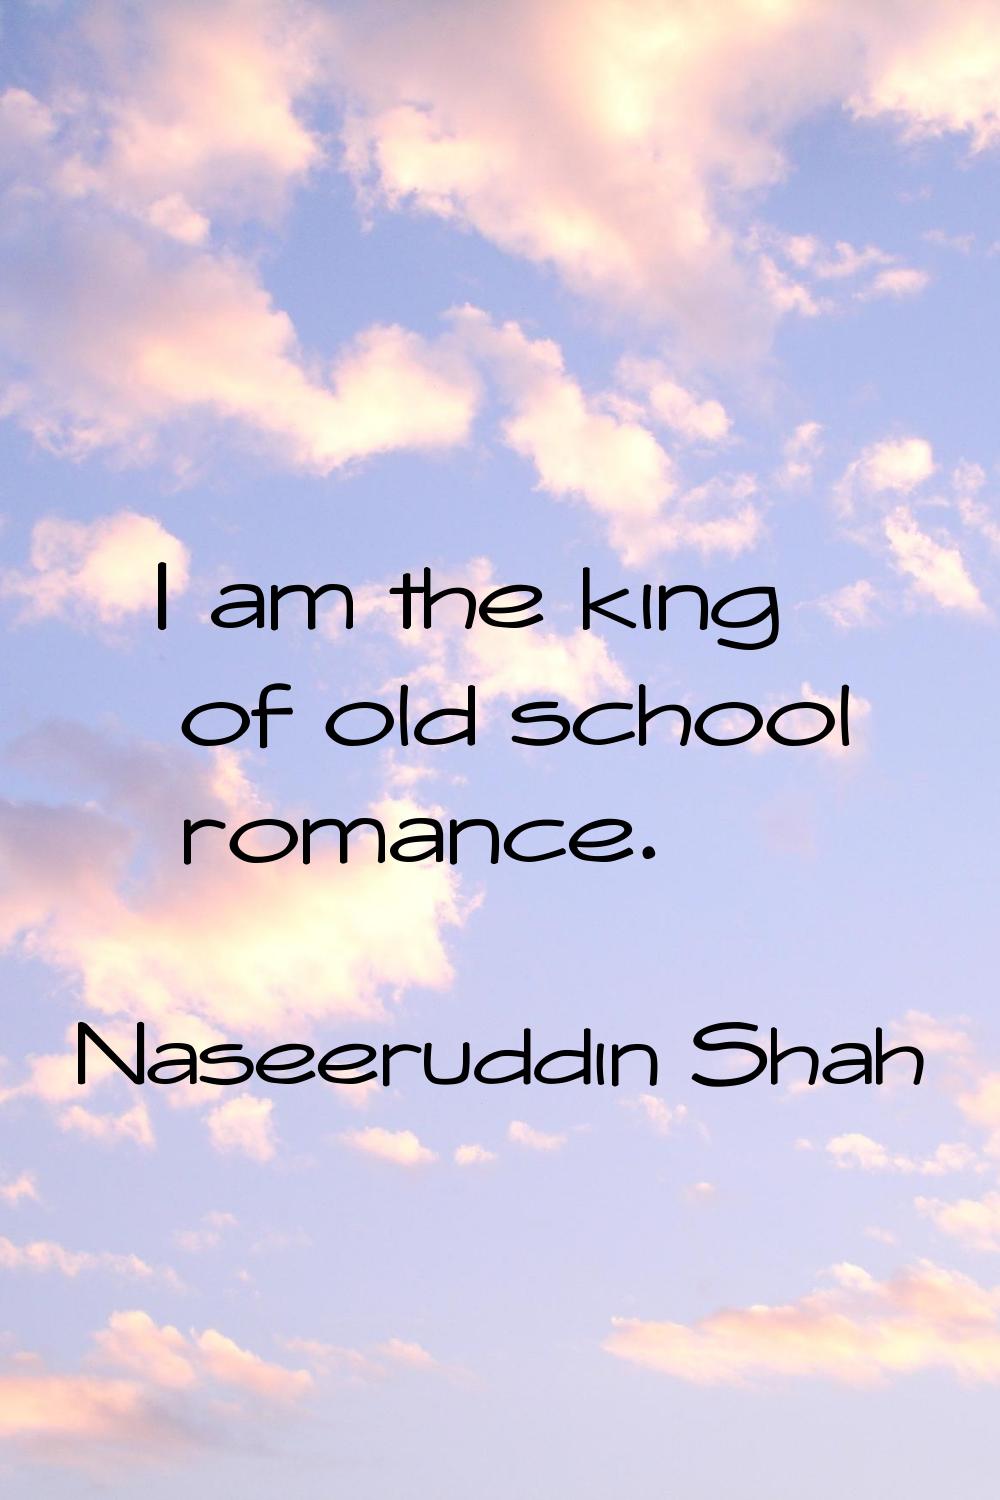 I am the king of old school romance.